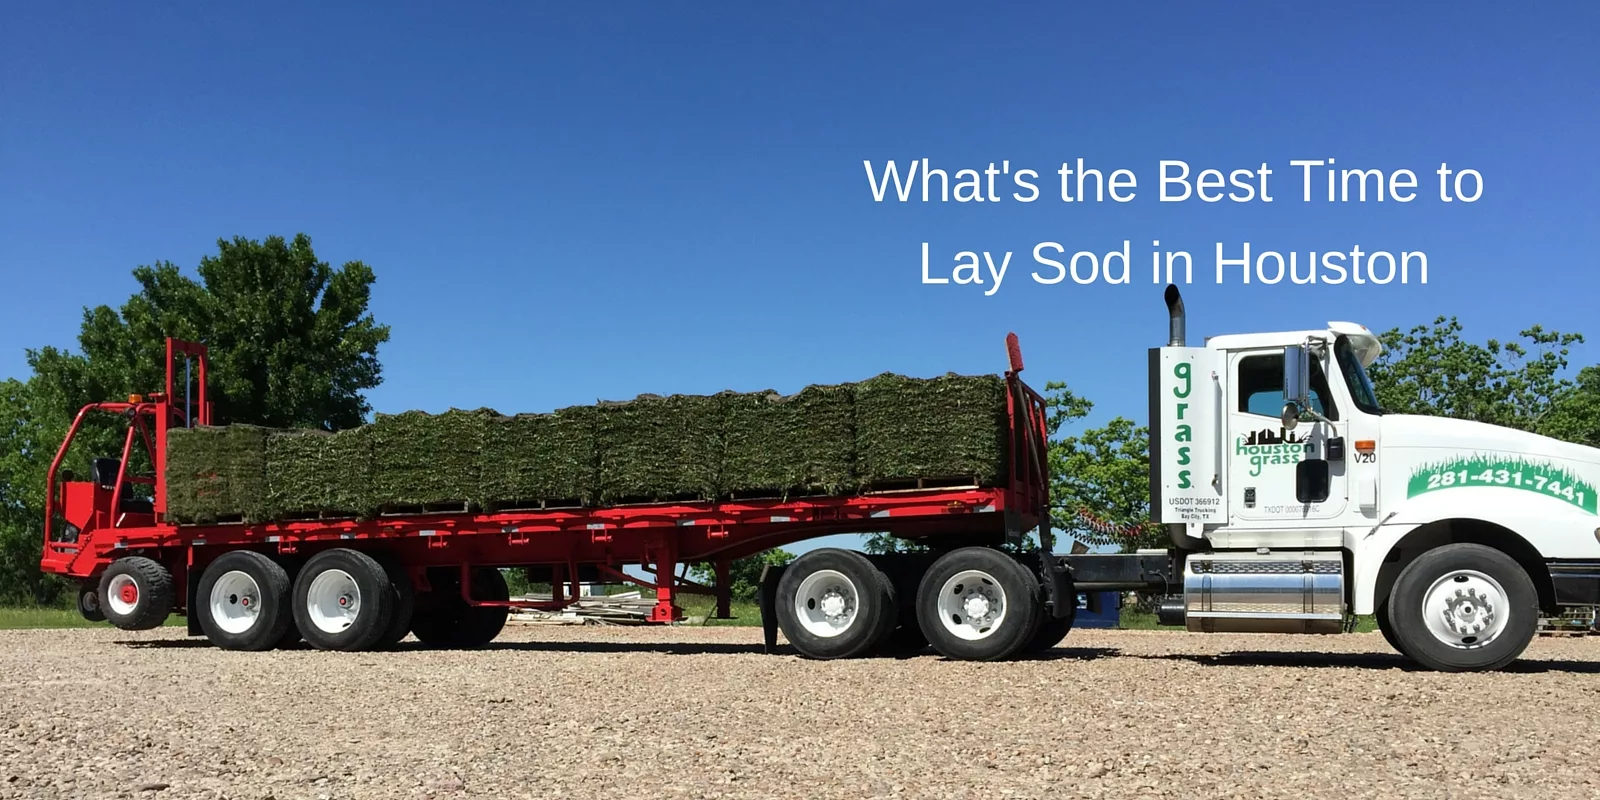 What's the best time to lay sod grass in Houston